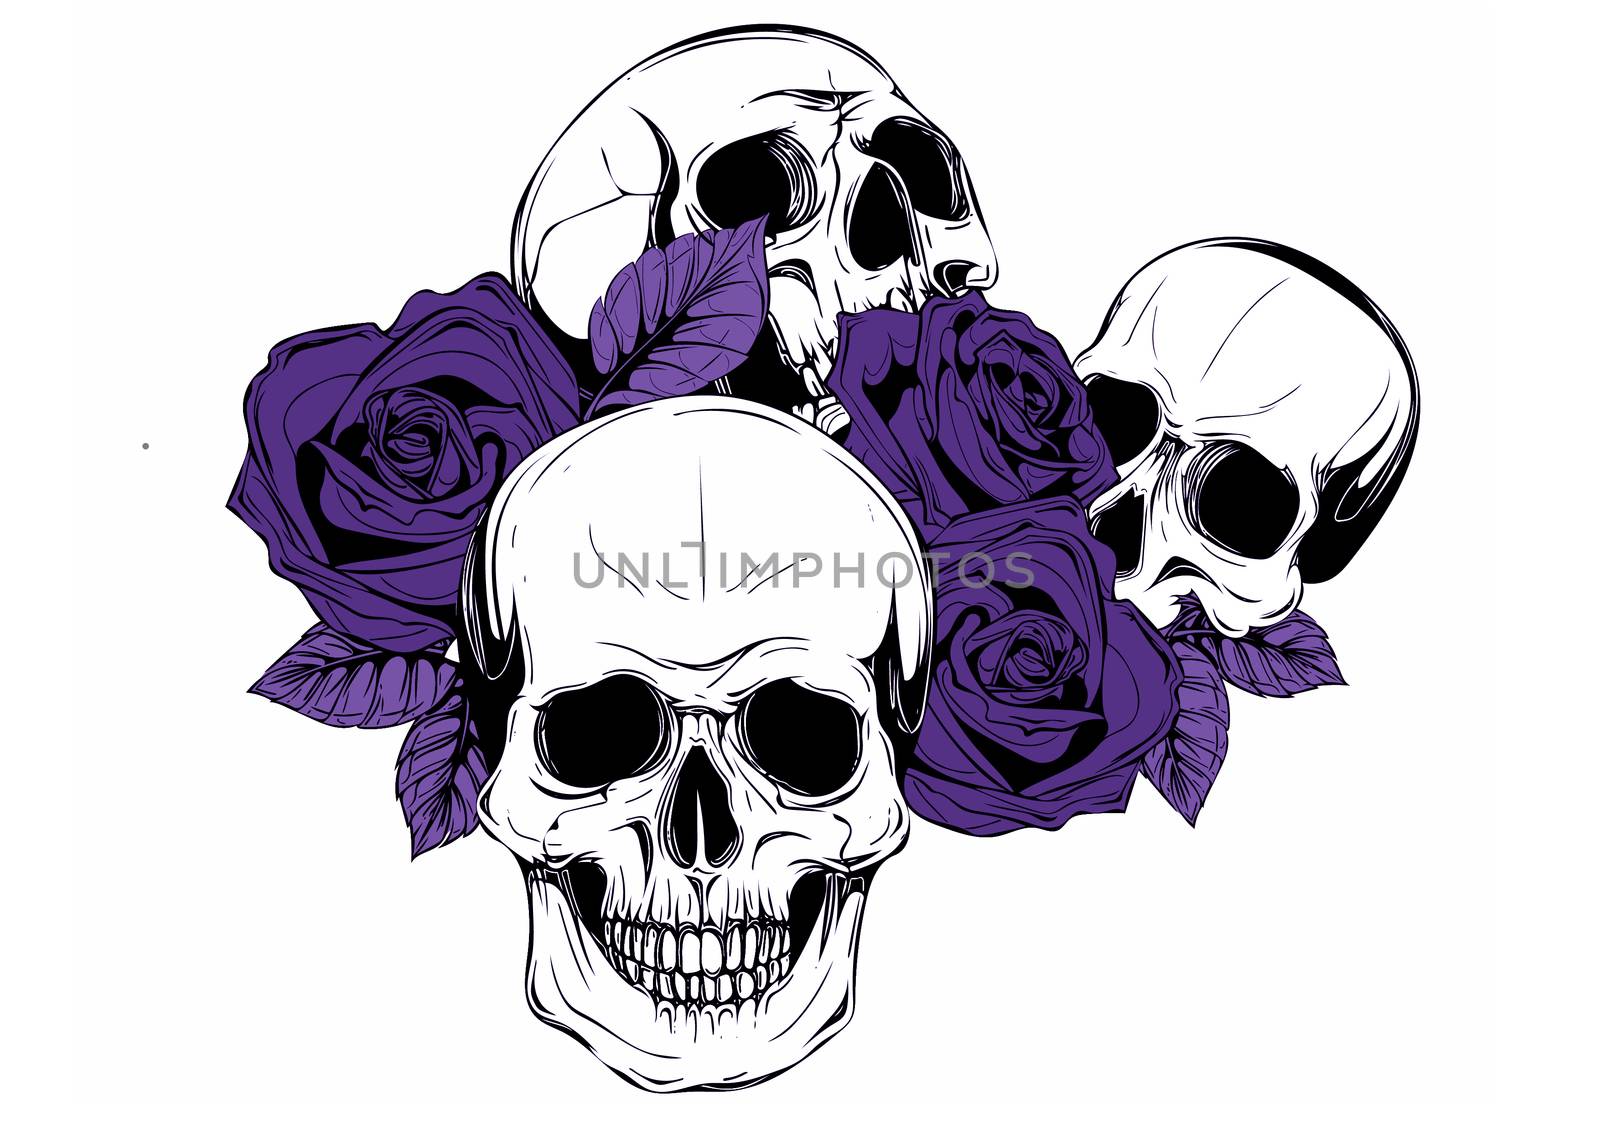 A human skull with roses on white background by dean